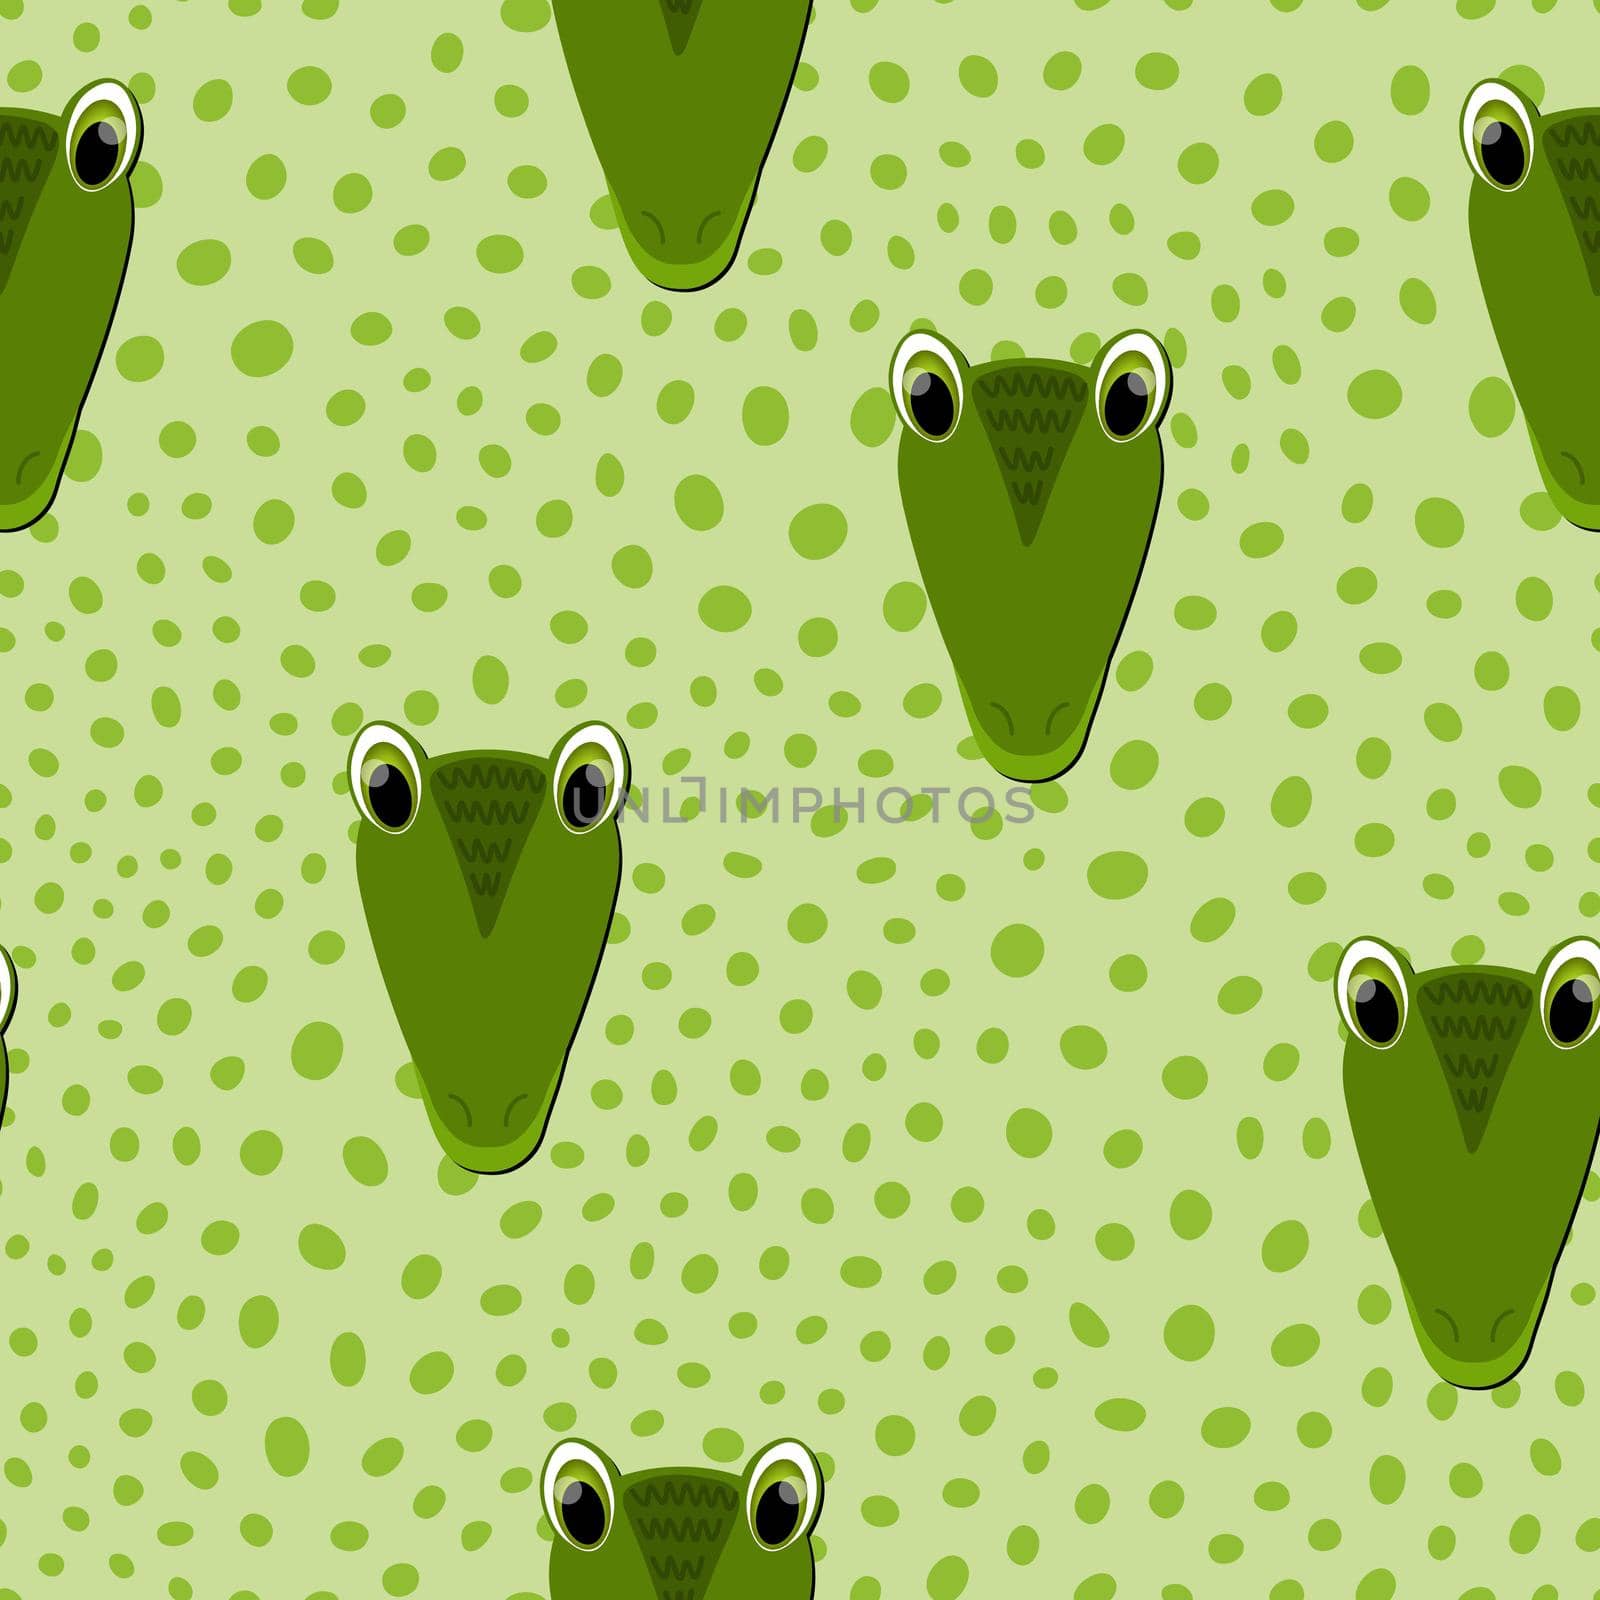 Vector flat animals colorful illustration for kids. Seamless pattern with cute crocodile face on green polka dots background. Adorable cartoon character. Design for card, poster, fabric, textile. by allaku